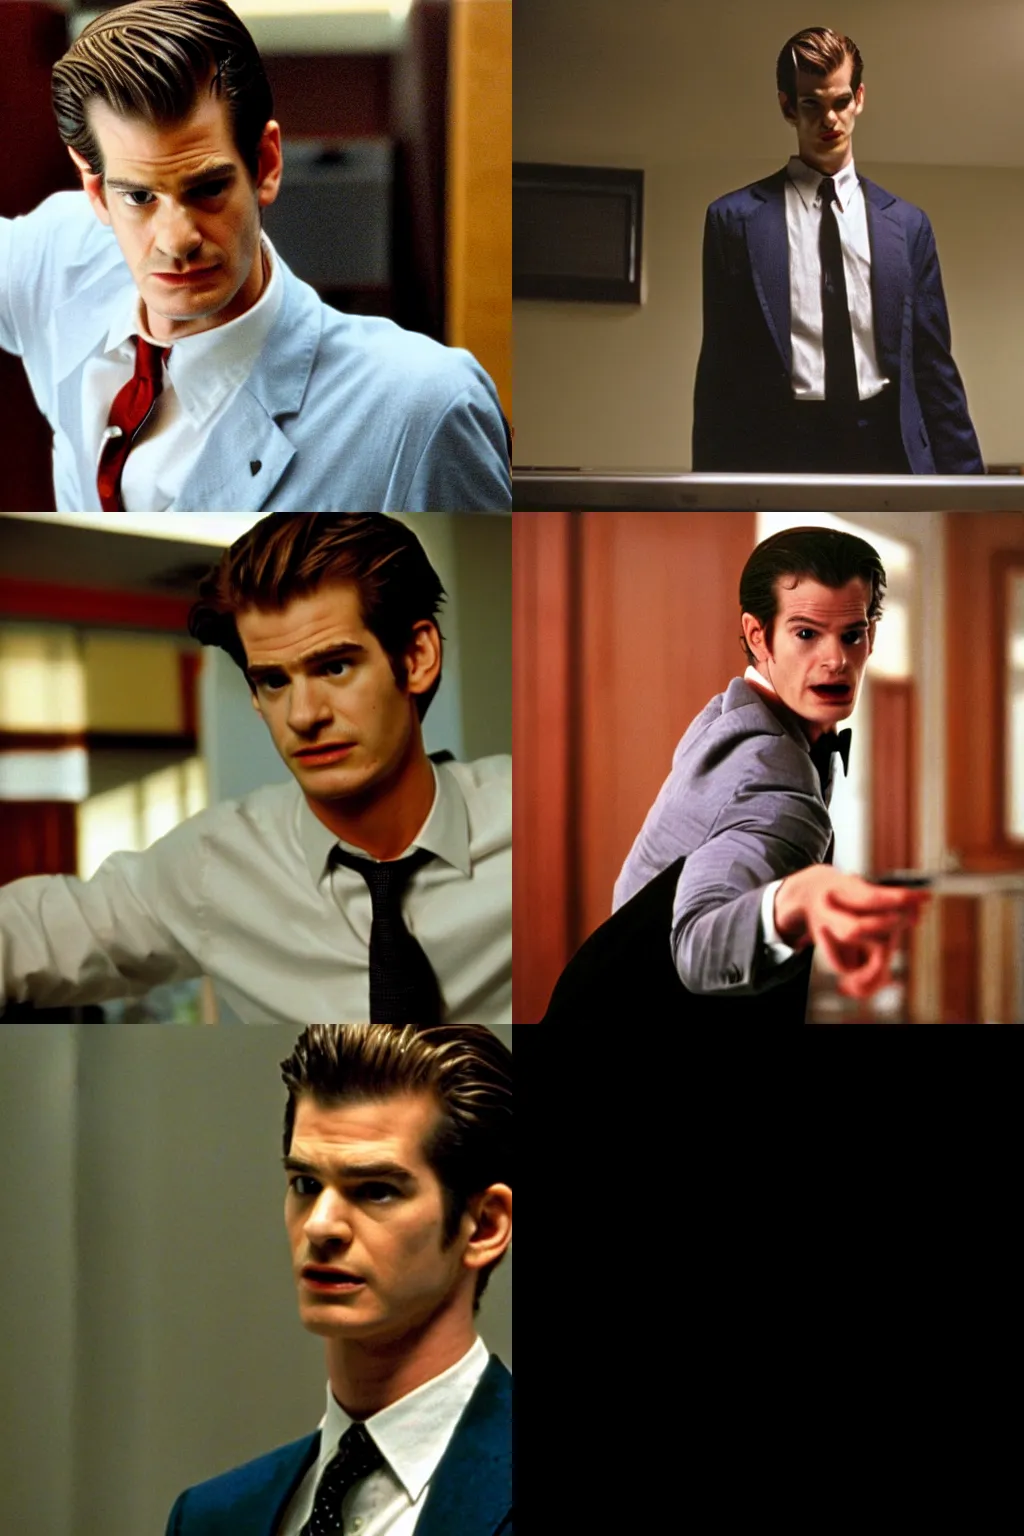 Prompt: A still of Andrew Garfield in American Psycho (2000), HD image